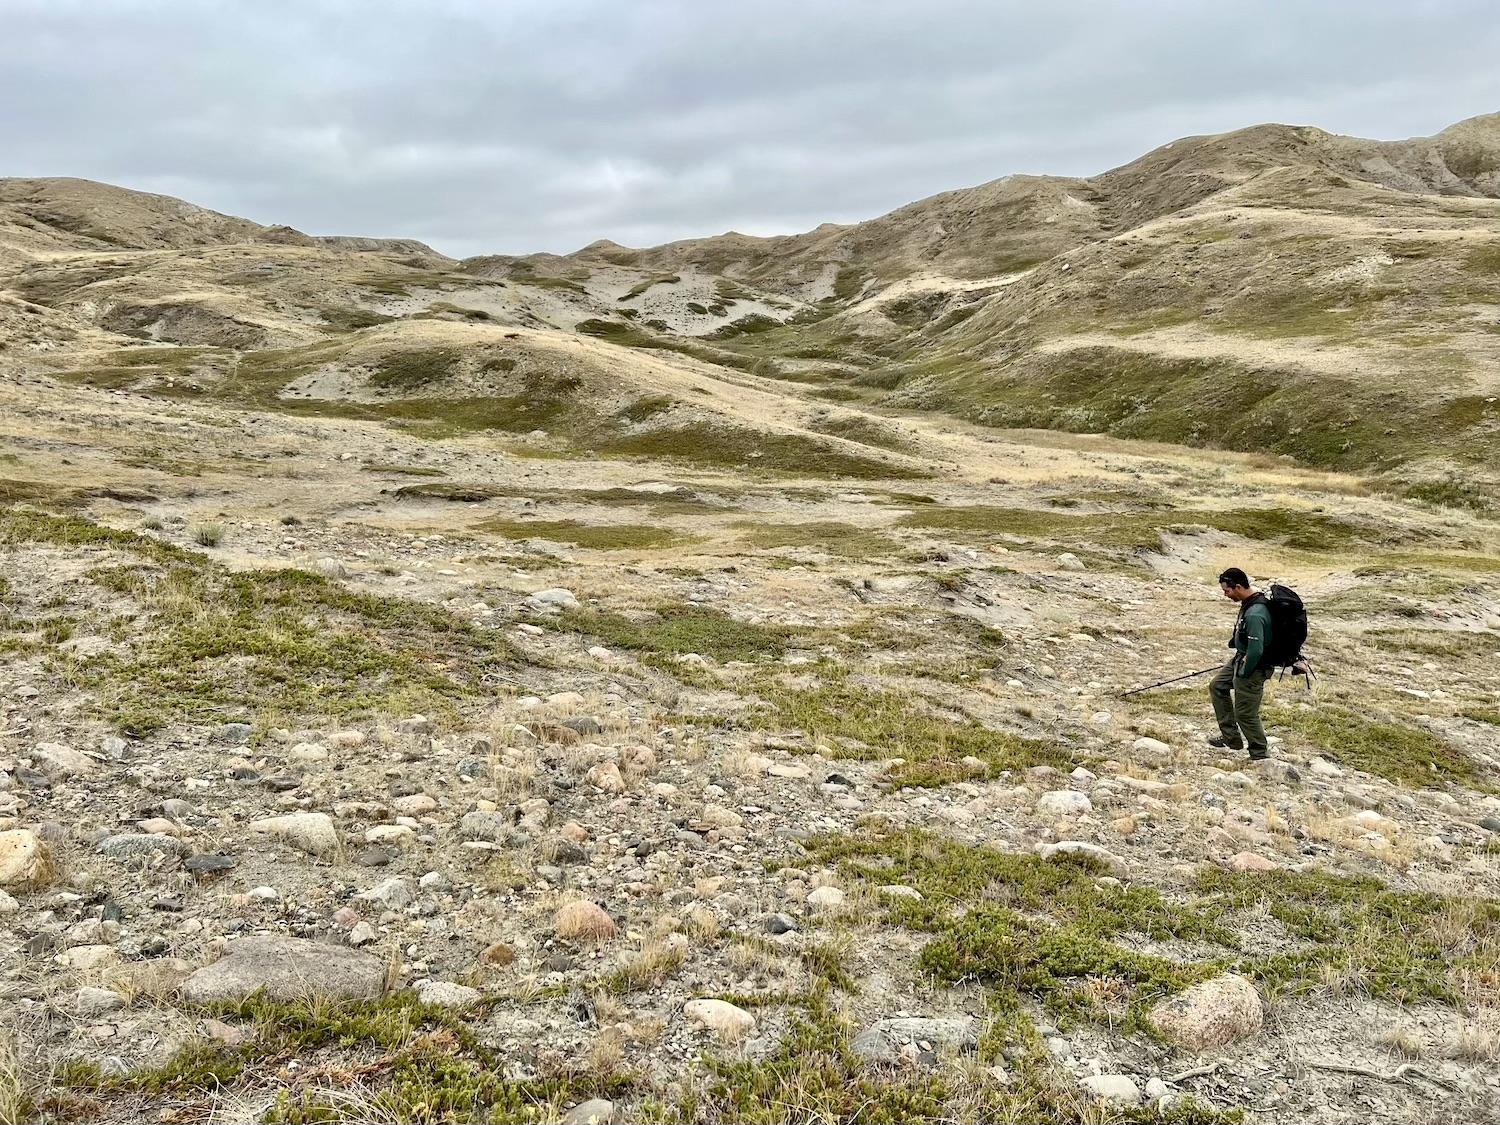 Parks Canada wildlife ecologist Stefano Liccioli uses a walking stick to search for Greater Short-horned lizards.